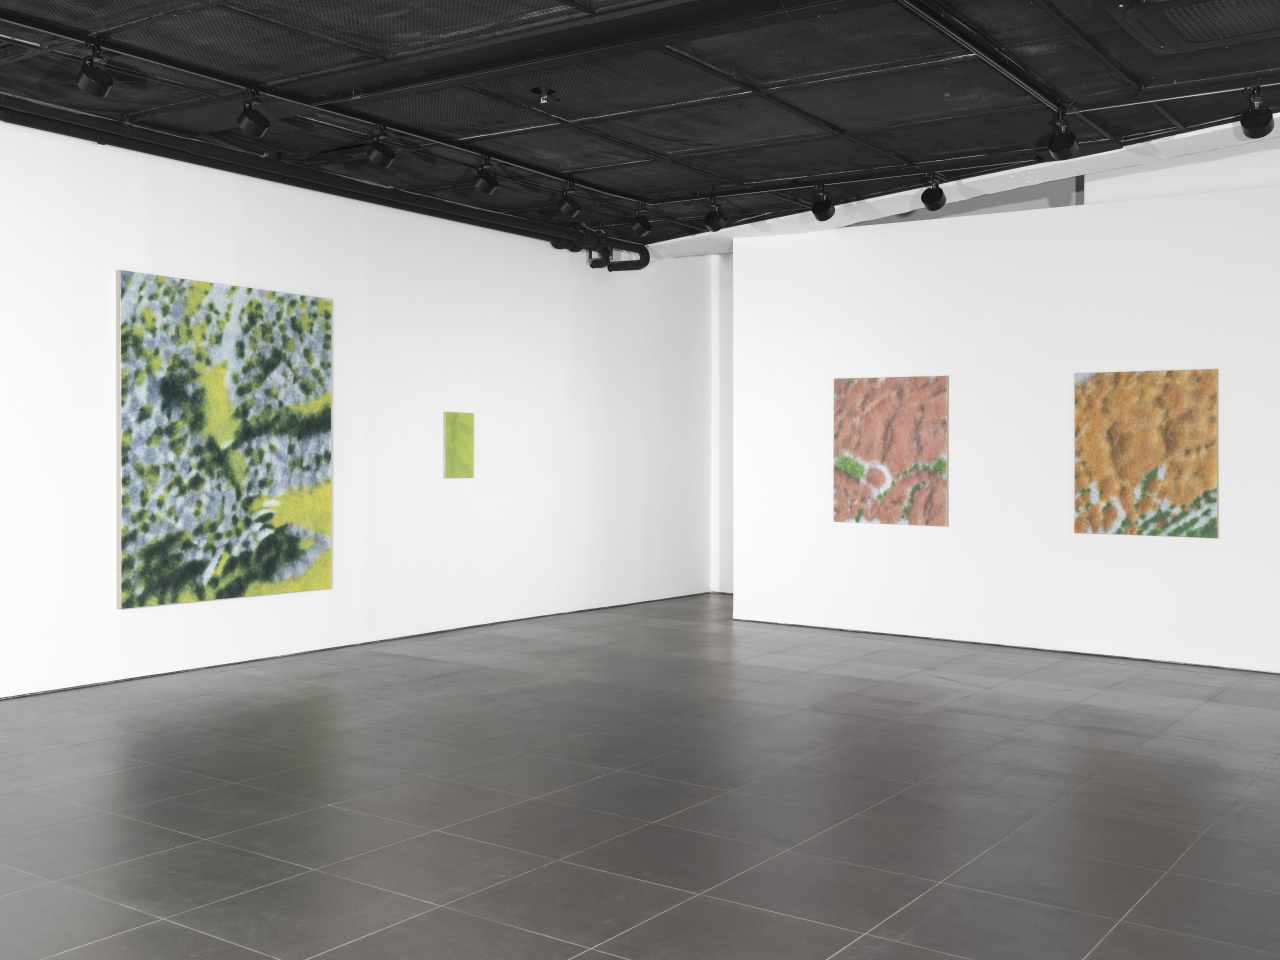 An installation view of “Chung Zuyoung: Meteorologica” at Gallery Hyundai (Gallery Hyundai)